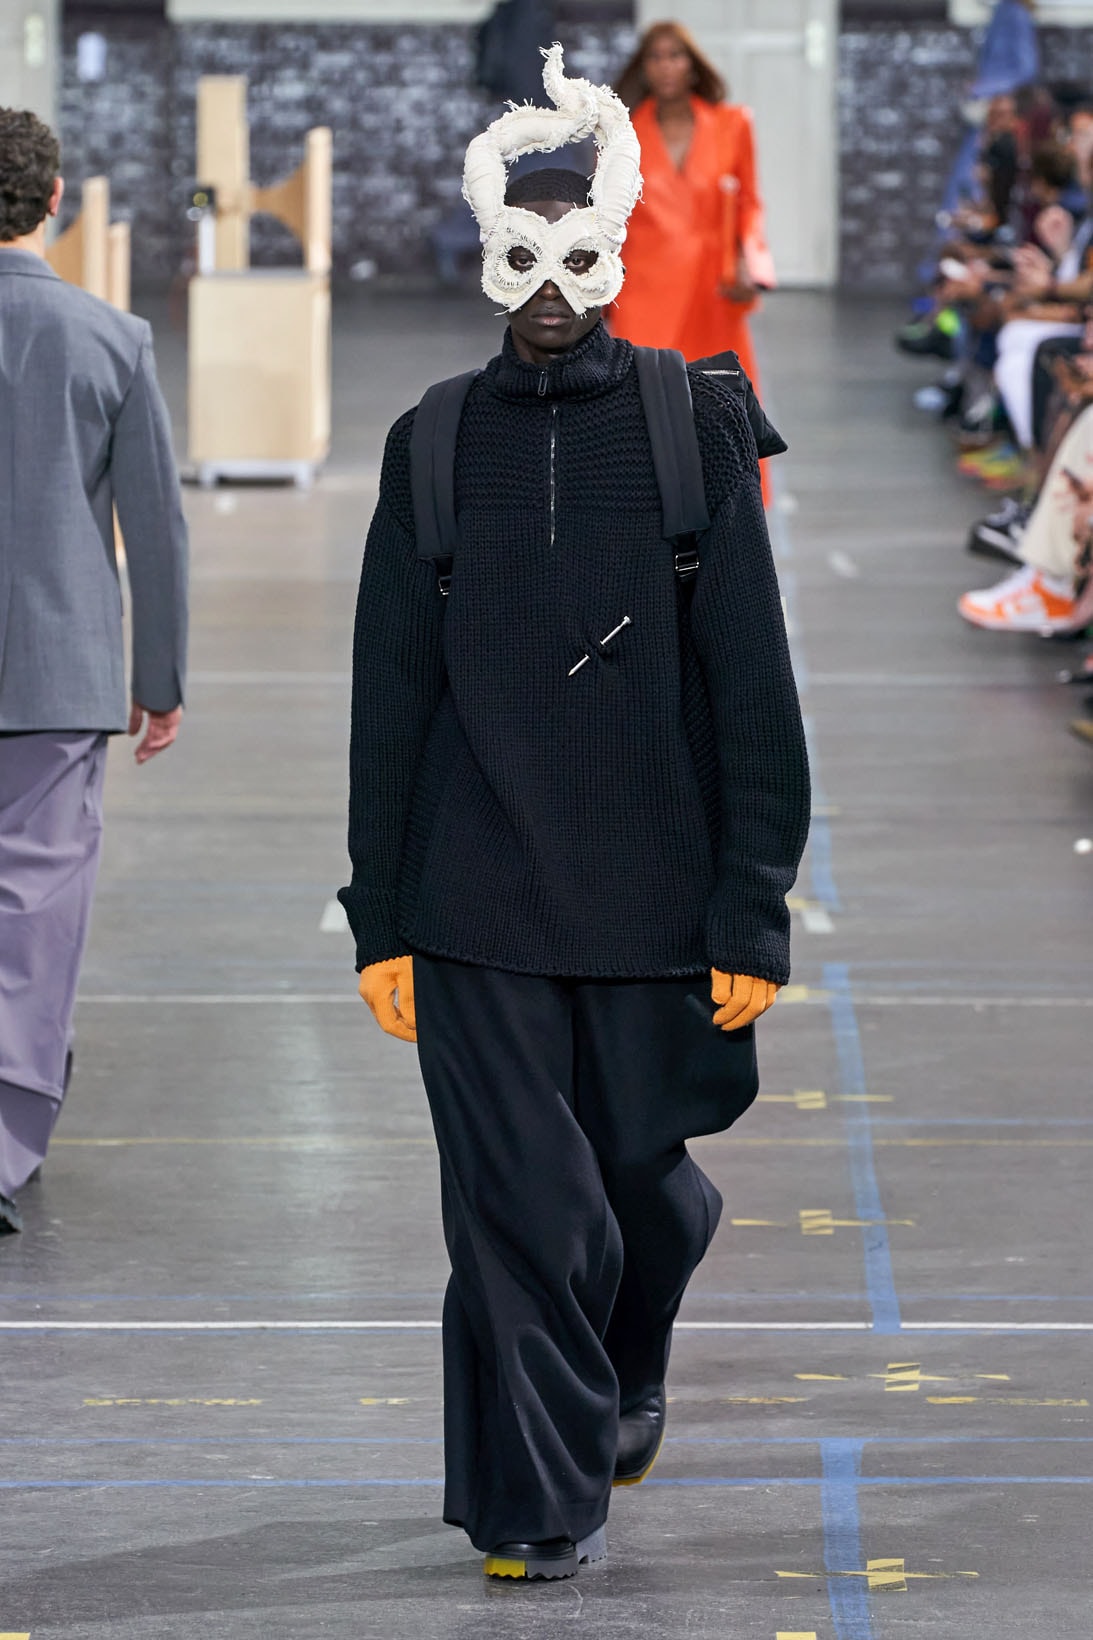 Virgil Abloh at Off-White Fall Winter 2021 Runway Show - “Laboratory of  Fun” / id : 4368500 by